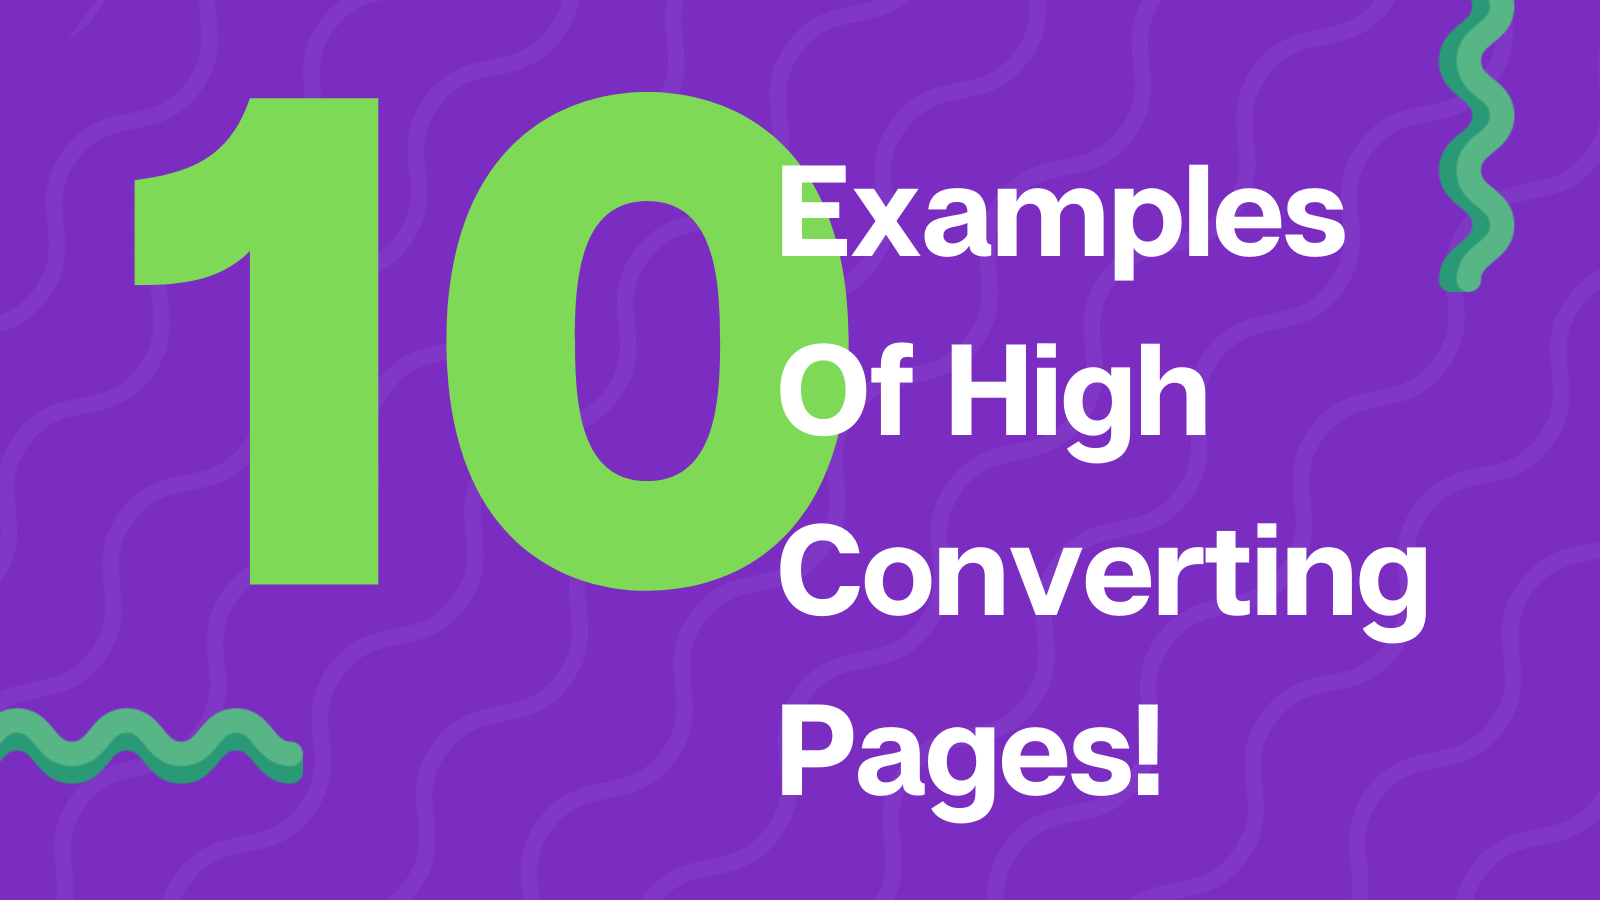 Product Listing Pages: 10 Examples Of High Converting Pages!